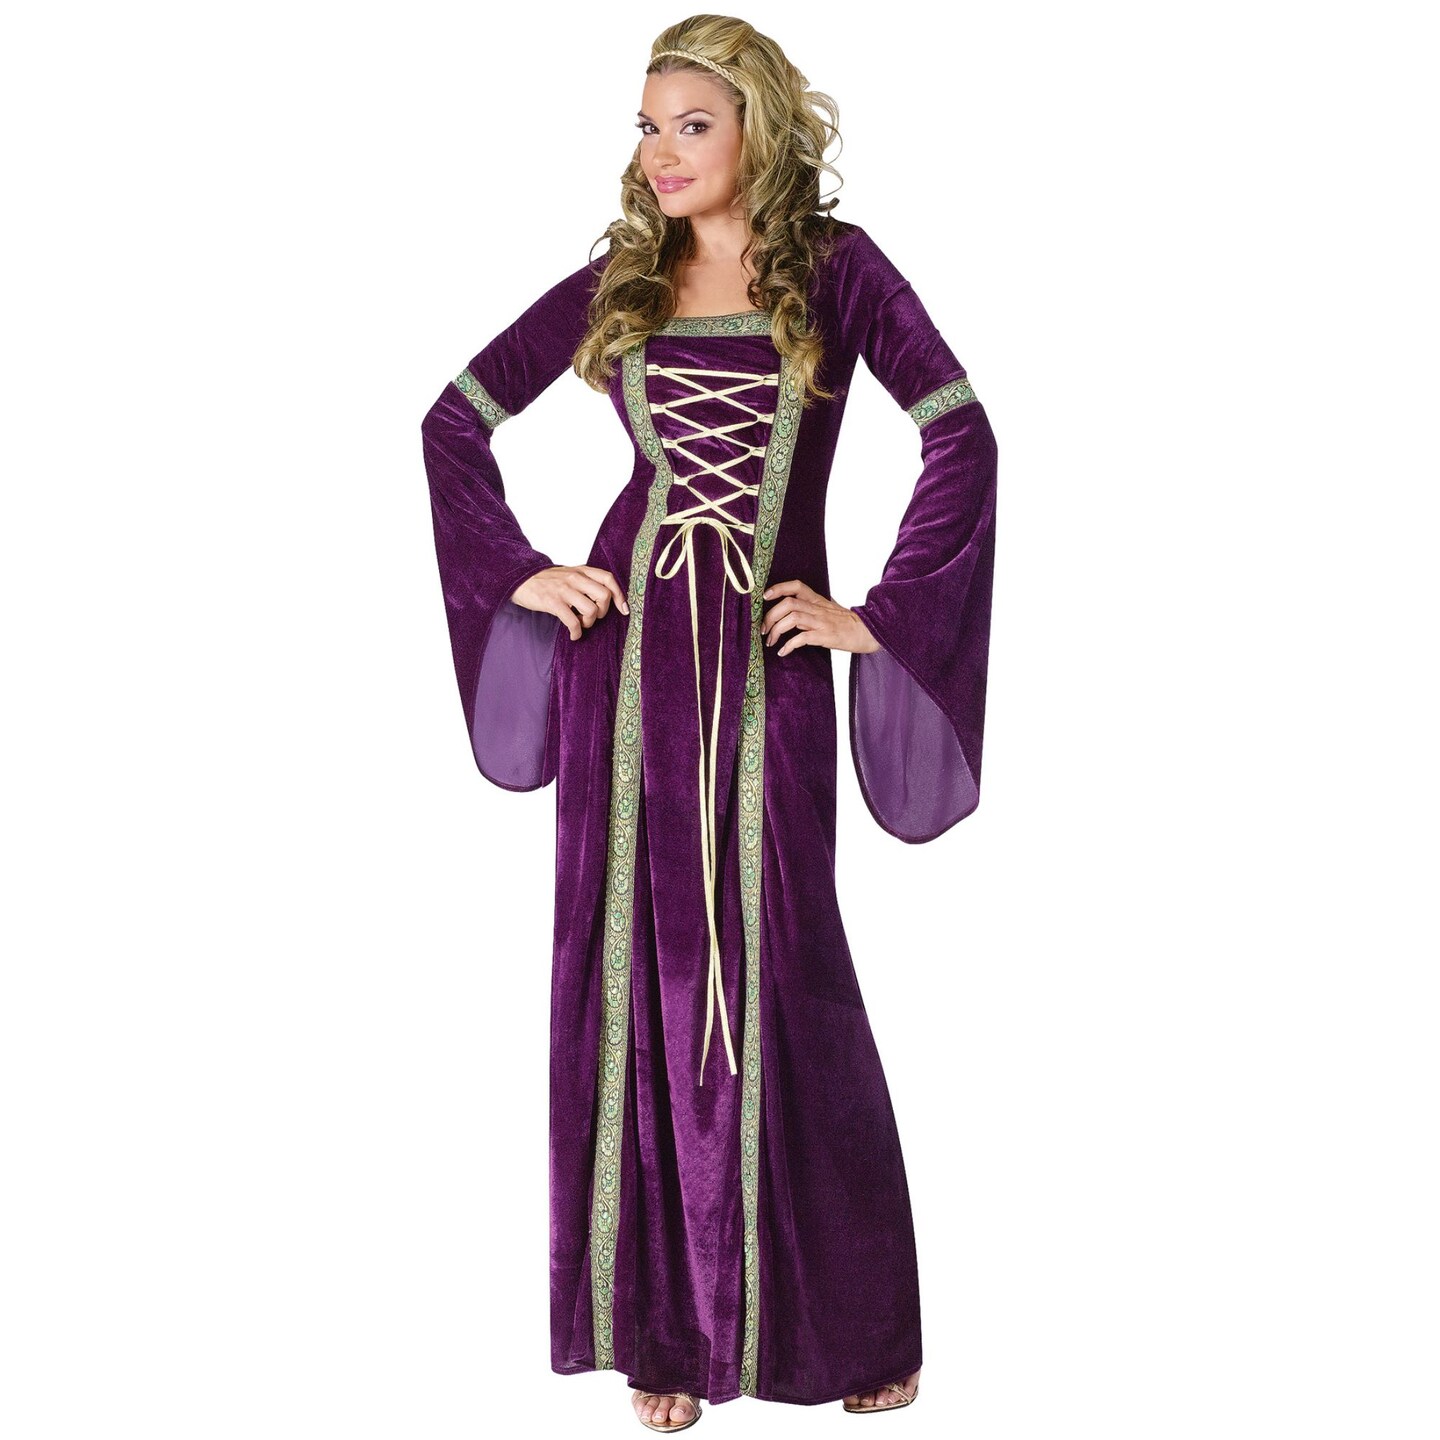 The Costume Center Purple and Green Women Adult Renaissance Lady Halloween Costume - Large